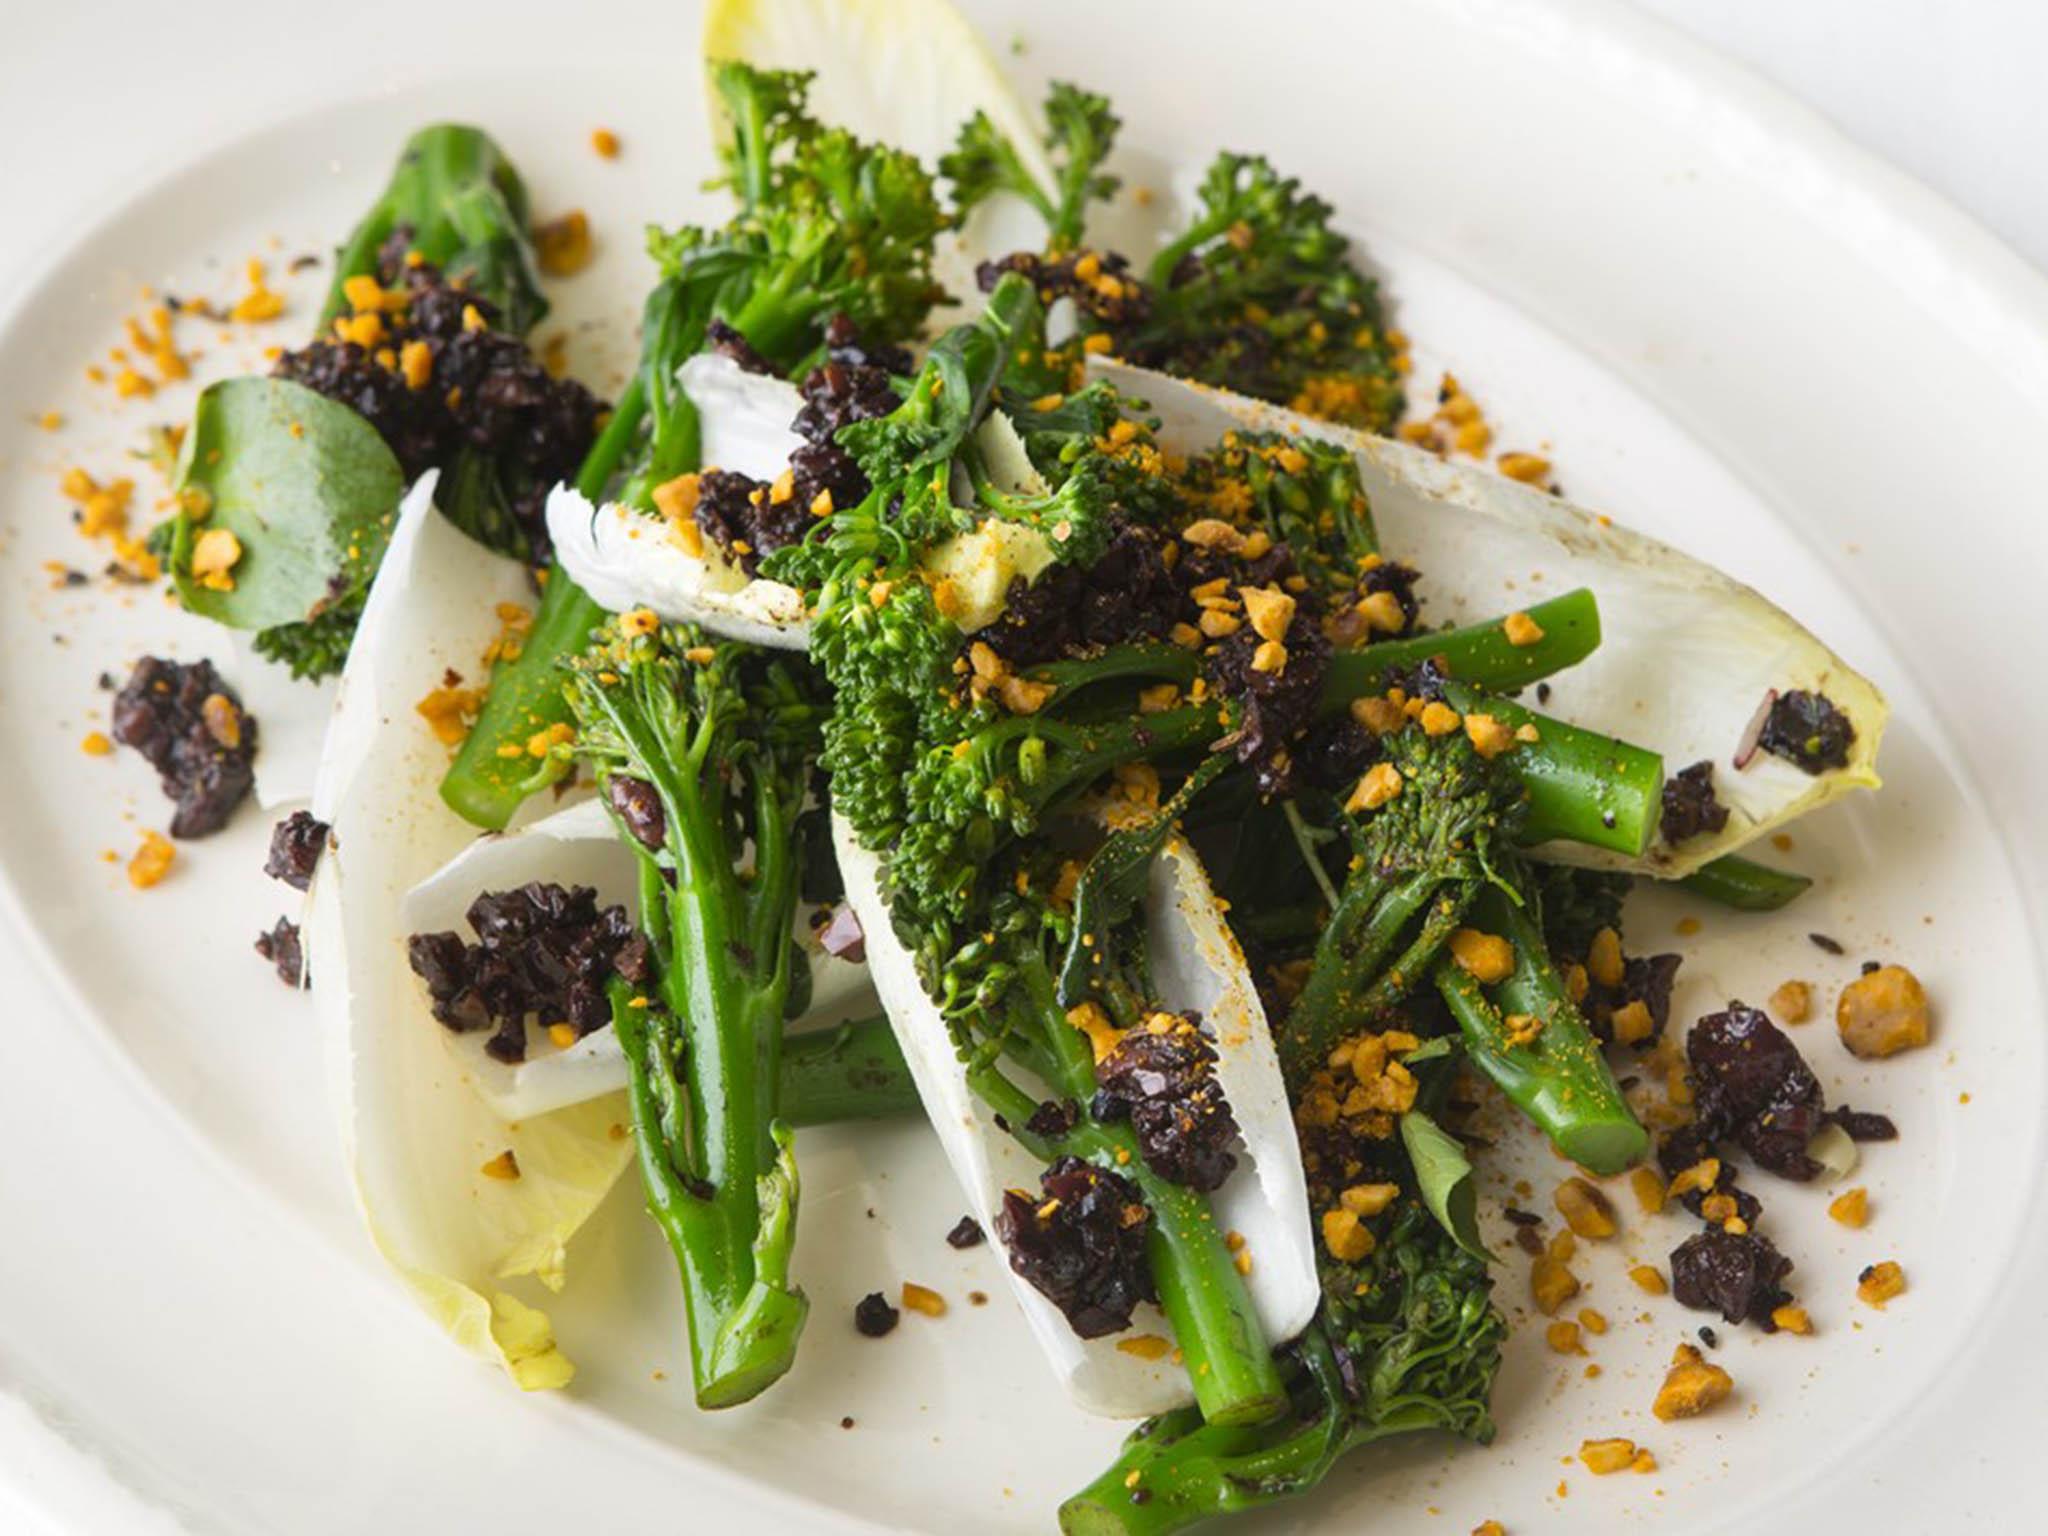 Tenderstem is packed with vitamin C for a delicious health punch